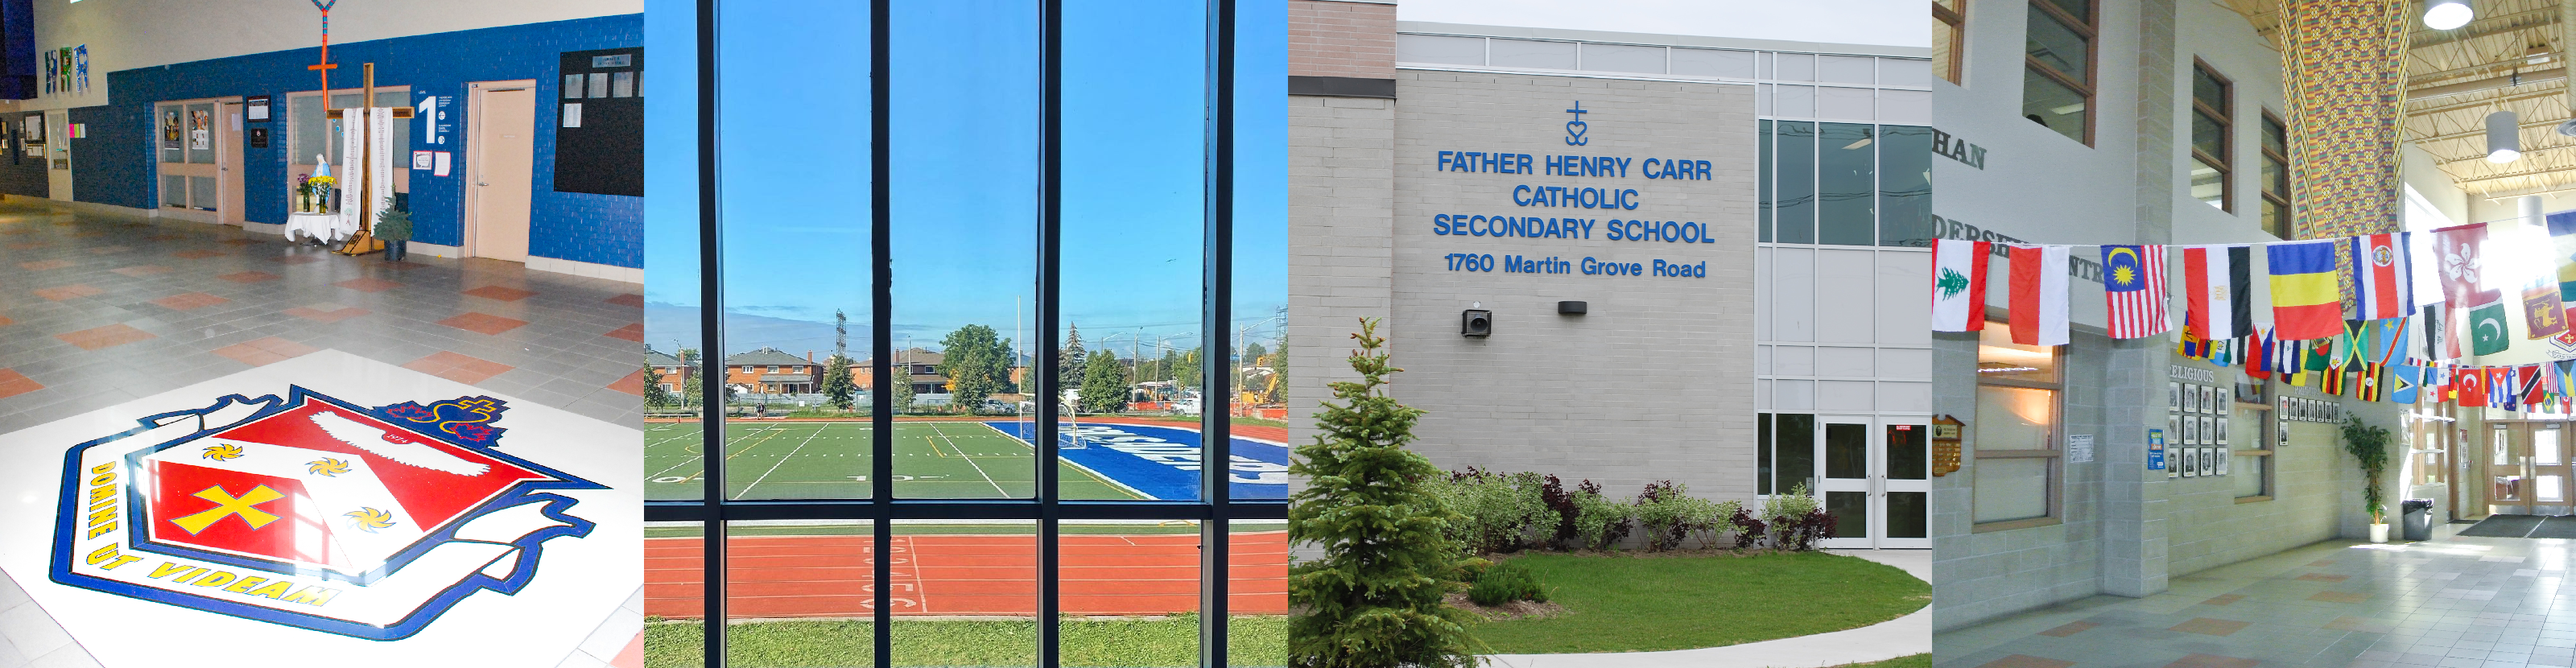 Four photos of the Father Henry Carr gymnasium, sports field, front of the school building, and entrance hallway.